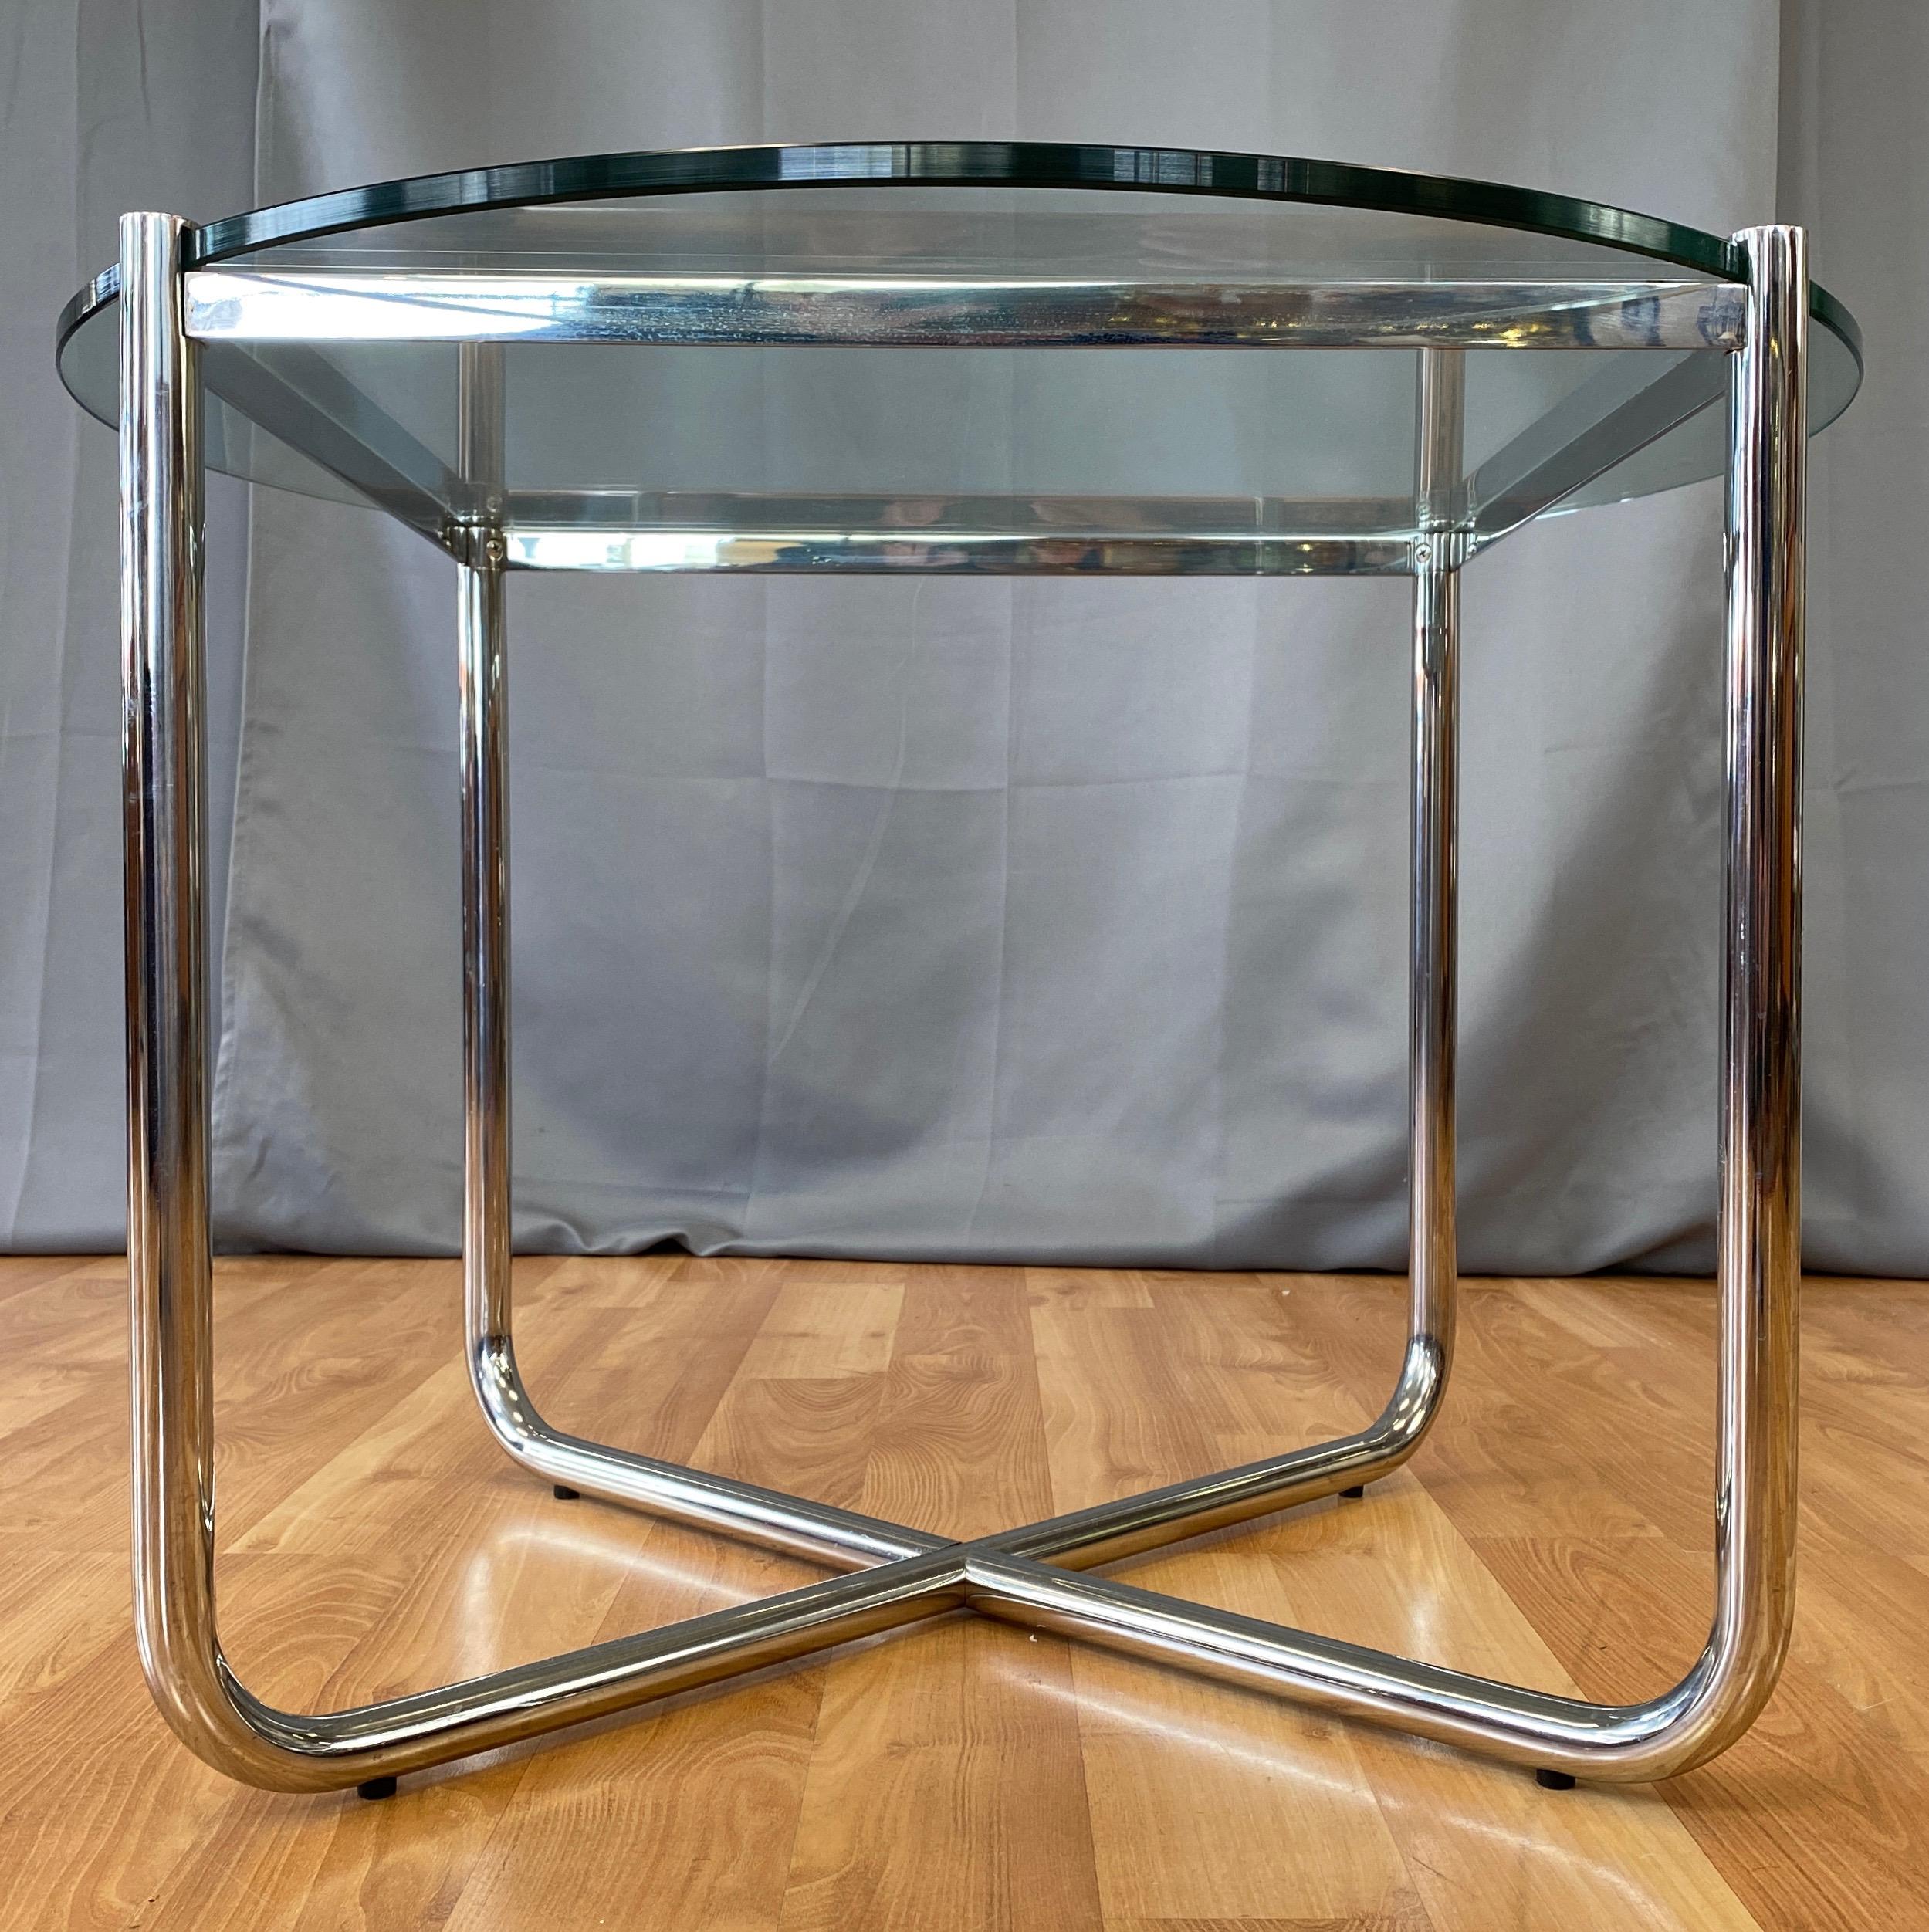 A vintage MR side table designed by Ludwig Mies van der Rohe in 1927, and produced by Knoll International in the 1970s.

Almost entirely seamless mirror-polished tubular and flat bar steel frame with inset .5-inch-thick, 27.5-inch-diameter glass